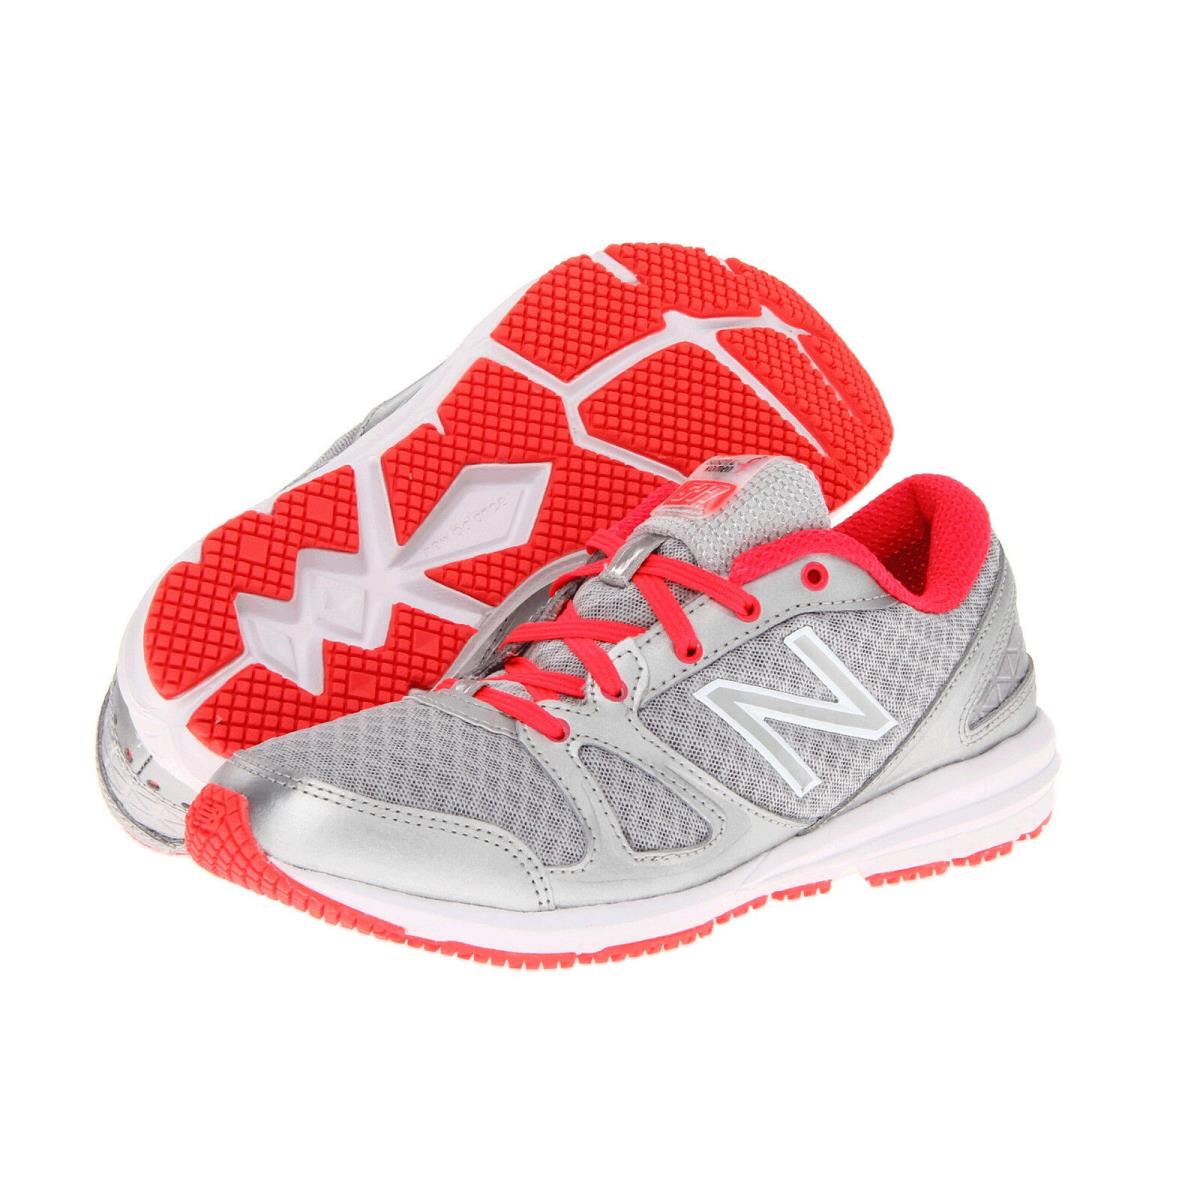 New Womens New Balance 577 Sneakers Shoes - 9.5